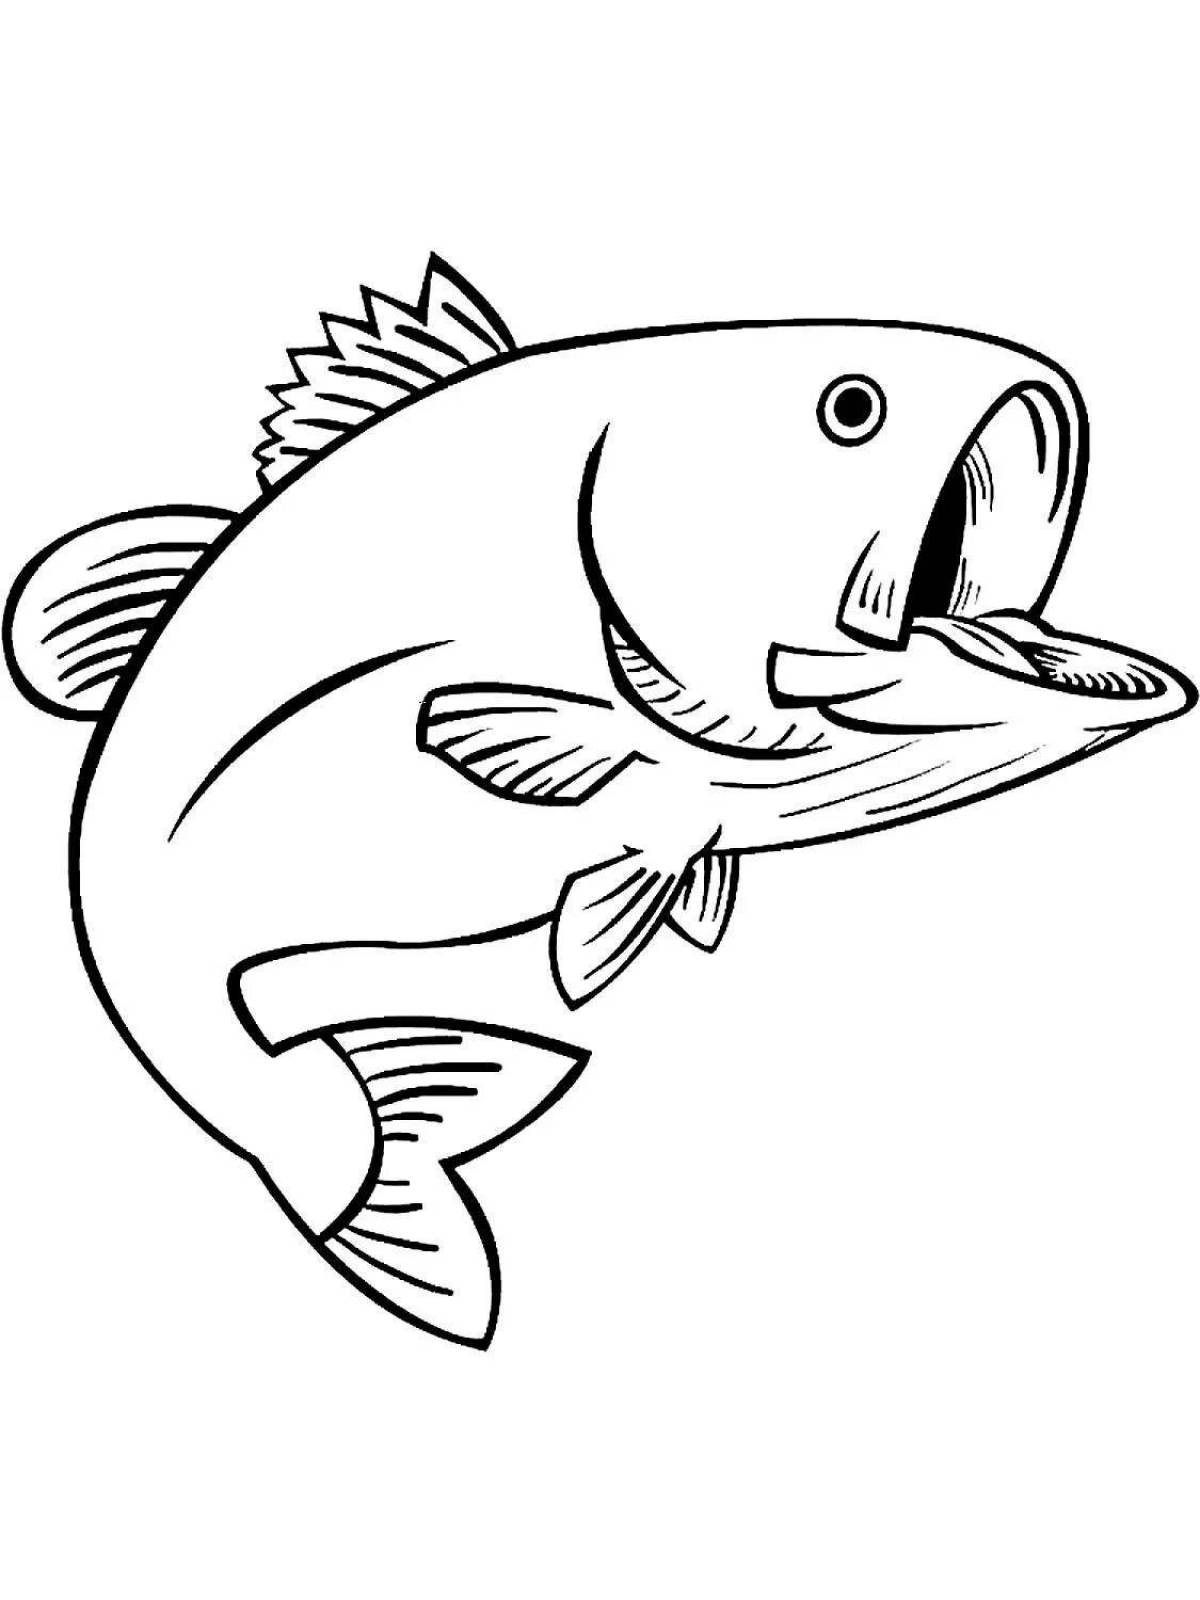 Exquisite big fish coloring page